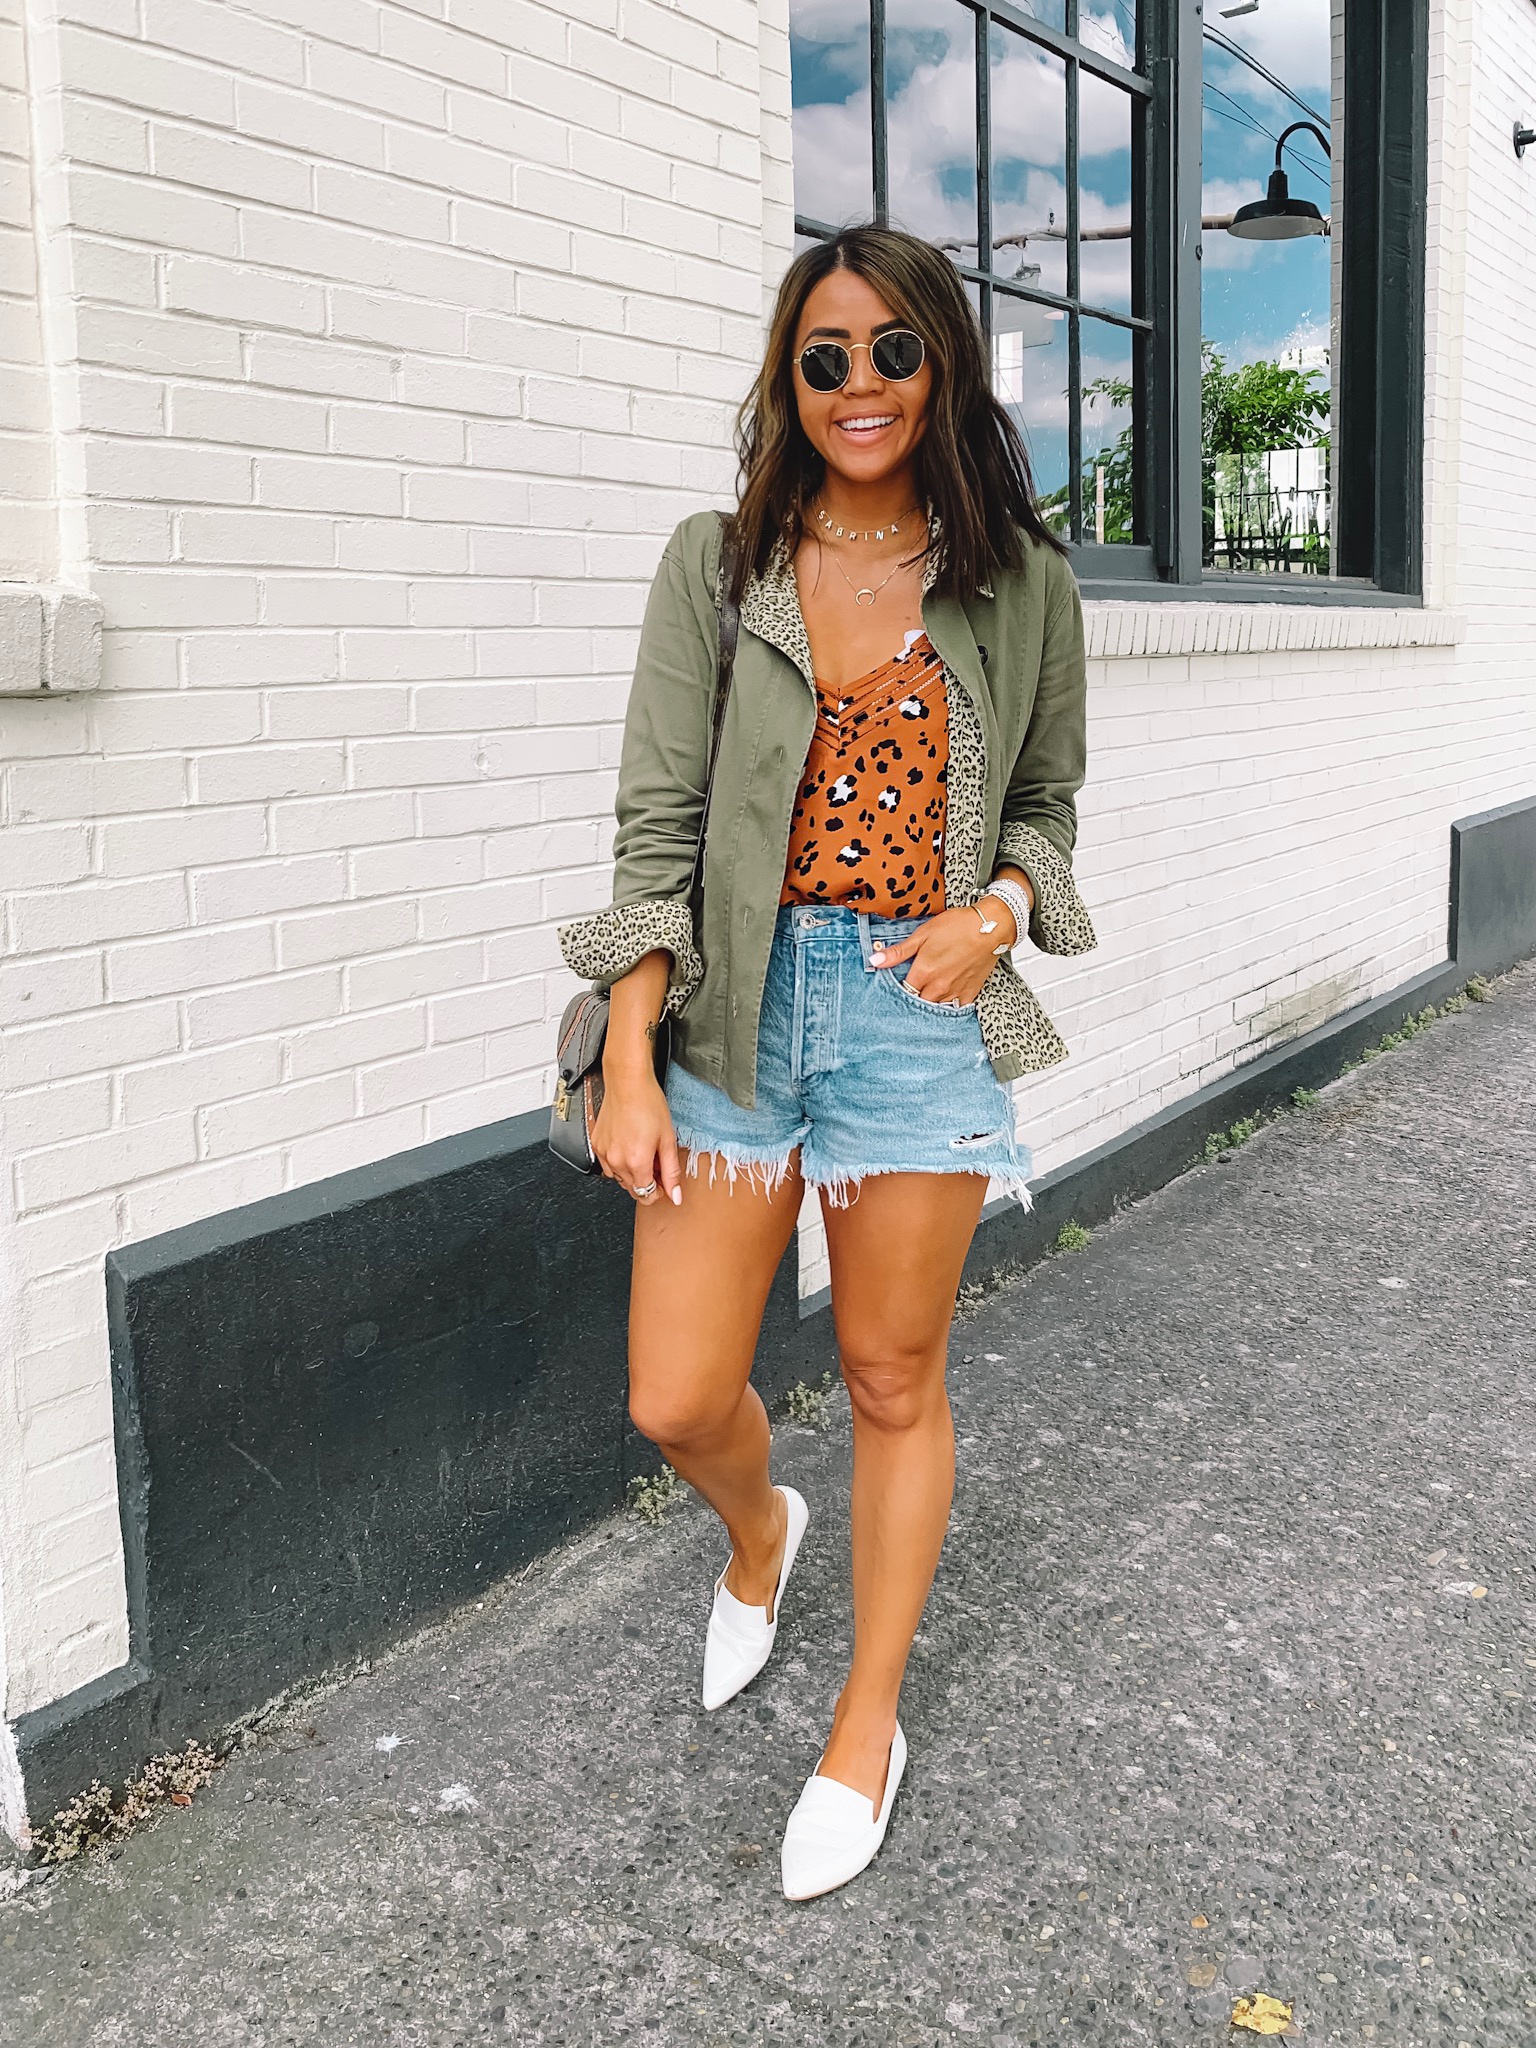 Summer to Fall Transitional Outfit Ideas - Gypsy Tan - 11